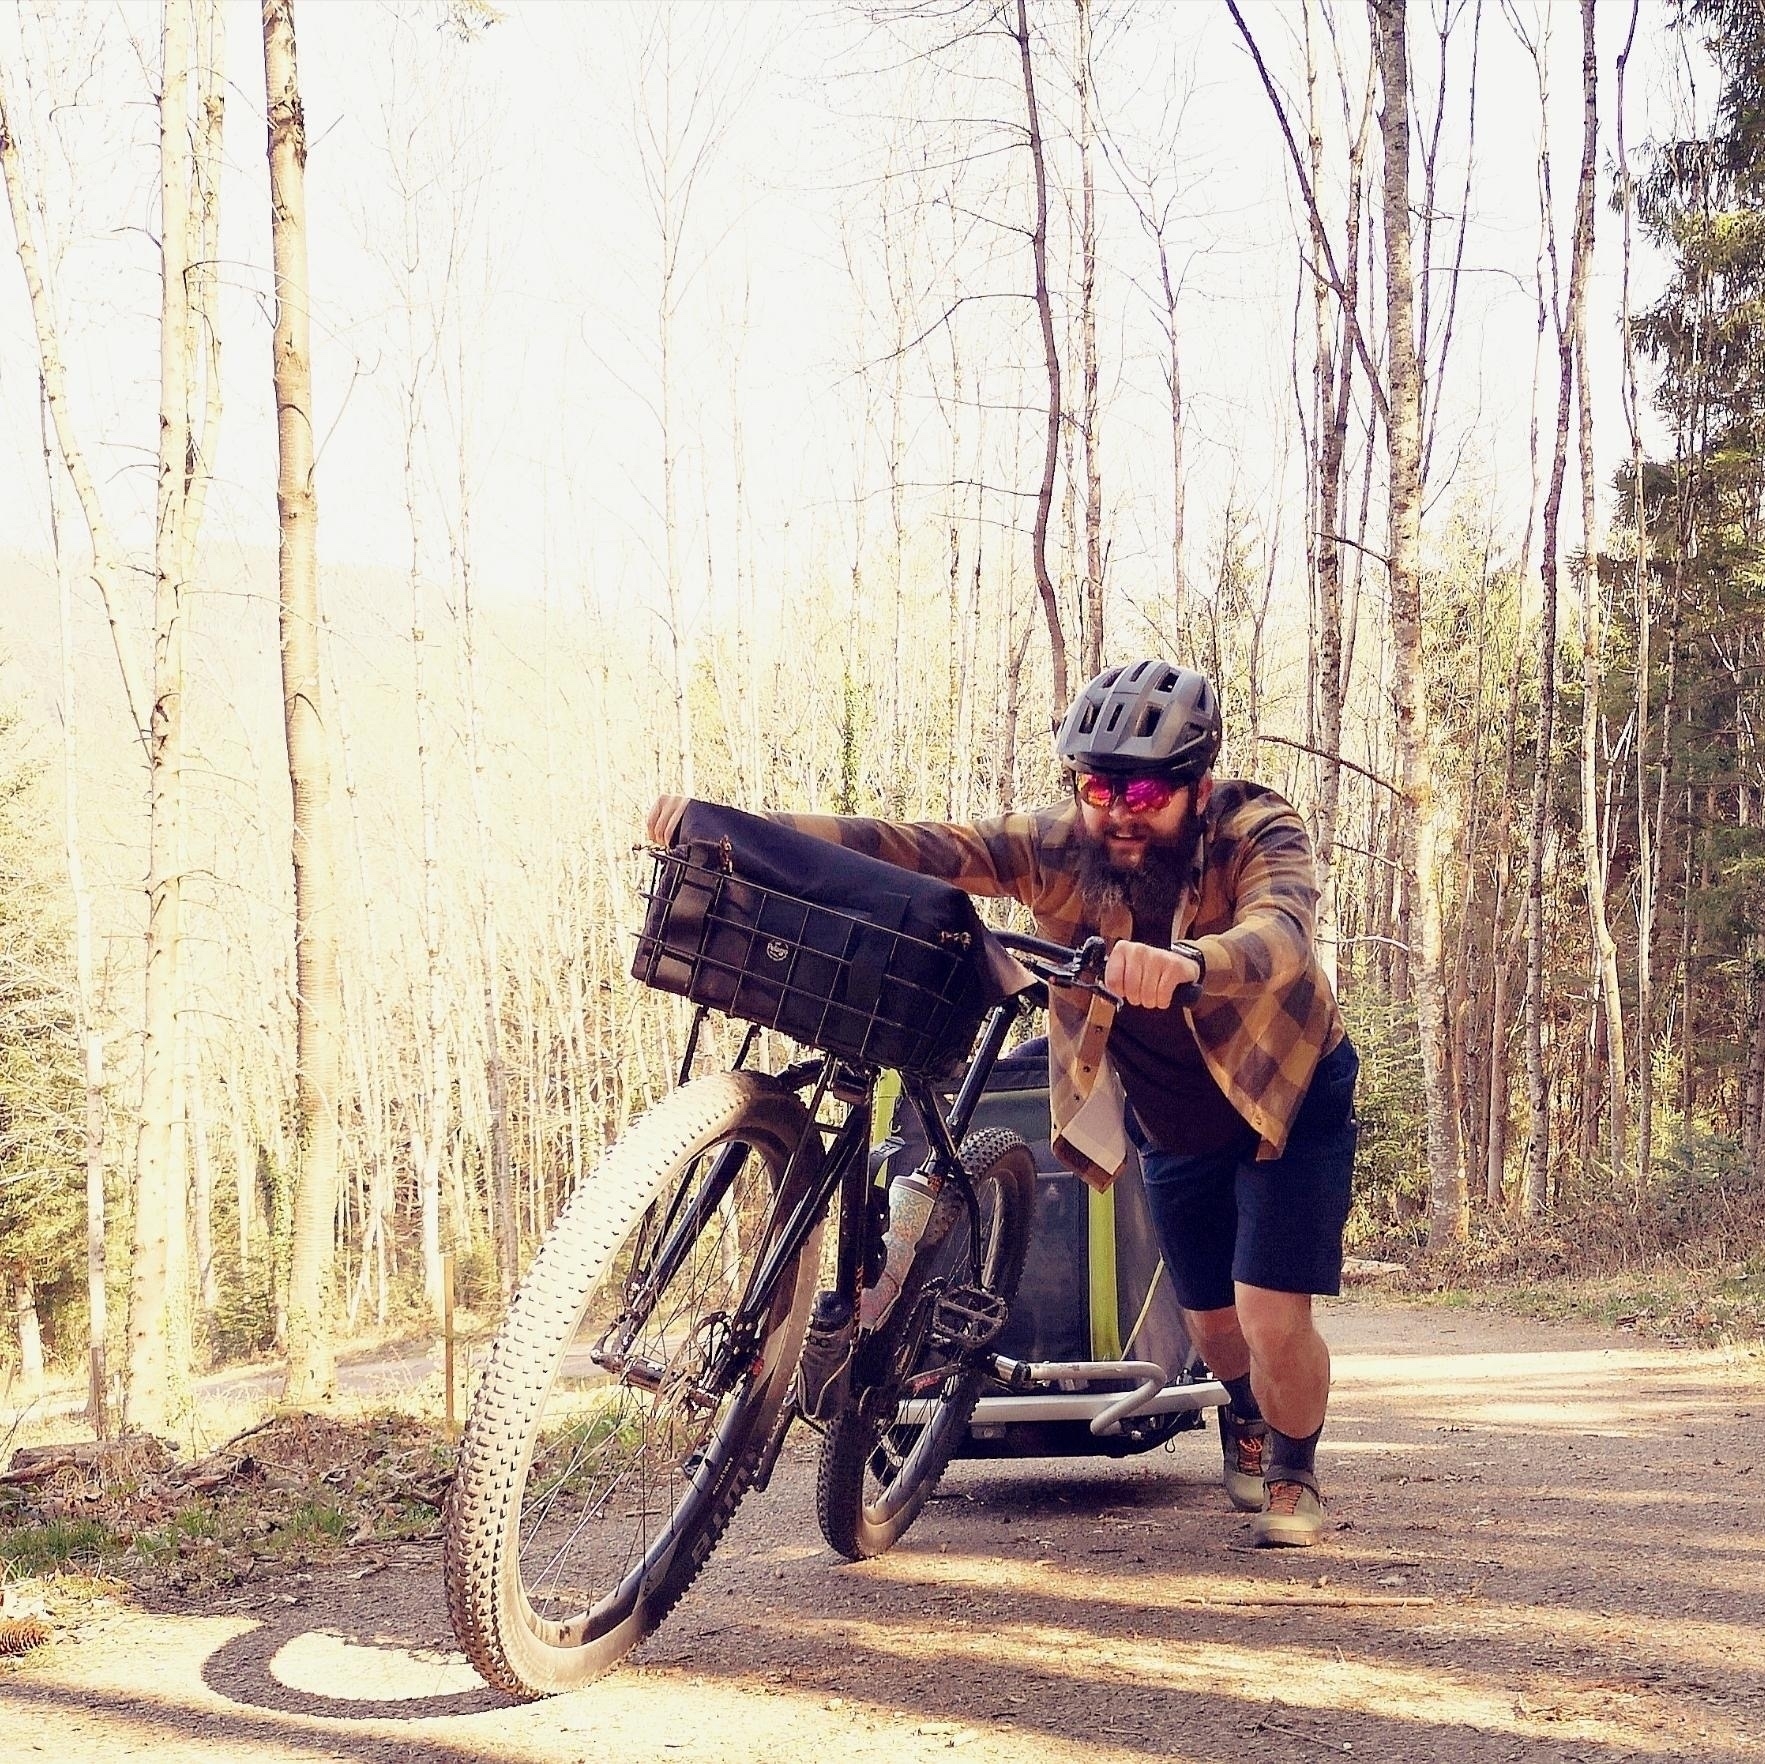 Man pushing a mountain bike with an attached dog trailer holding a dog up a very steep incline. The man is leaning over an into the task intently because od the strain.